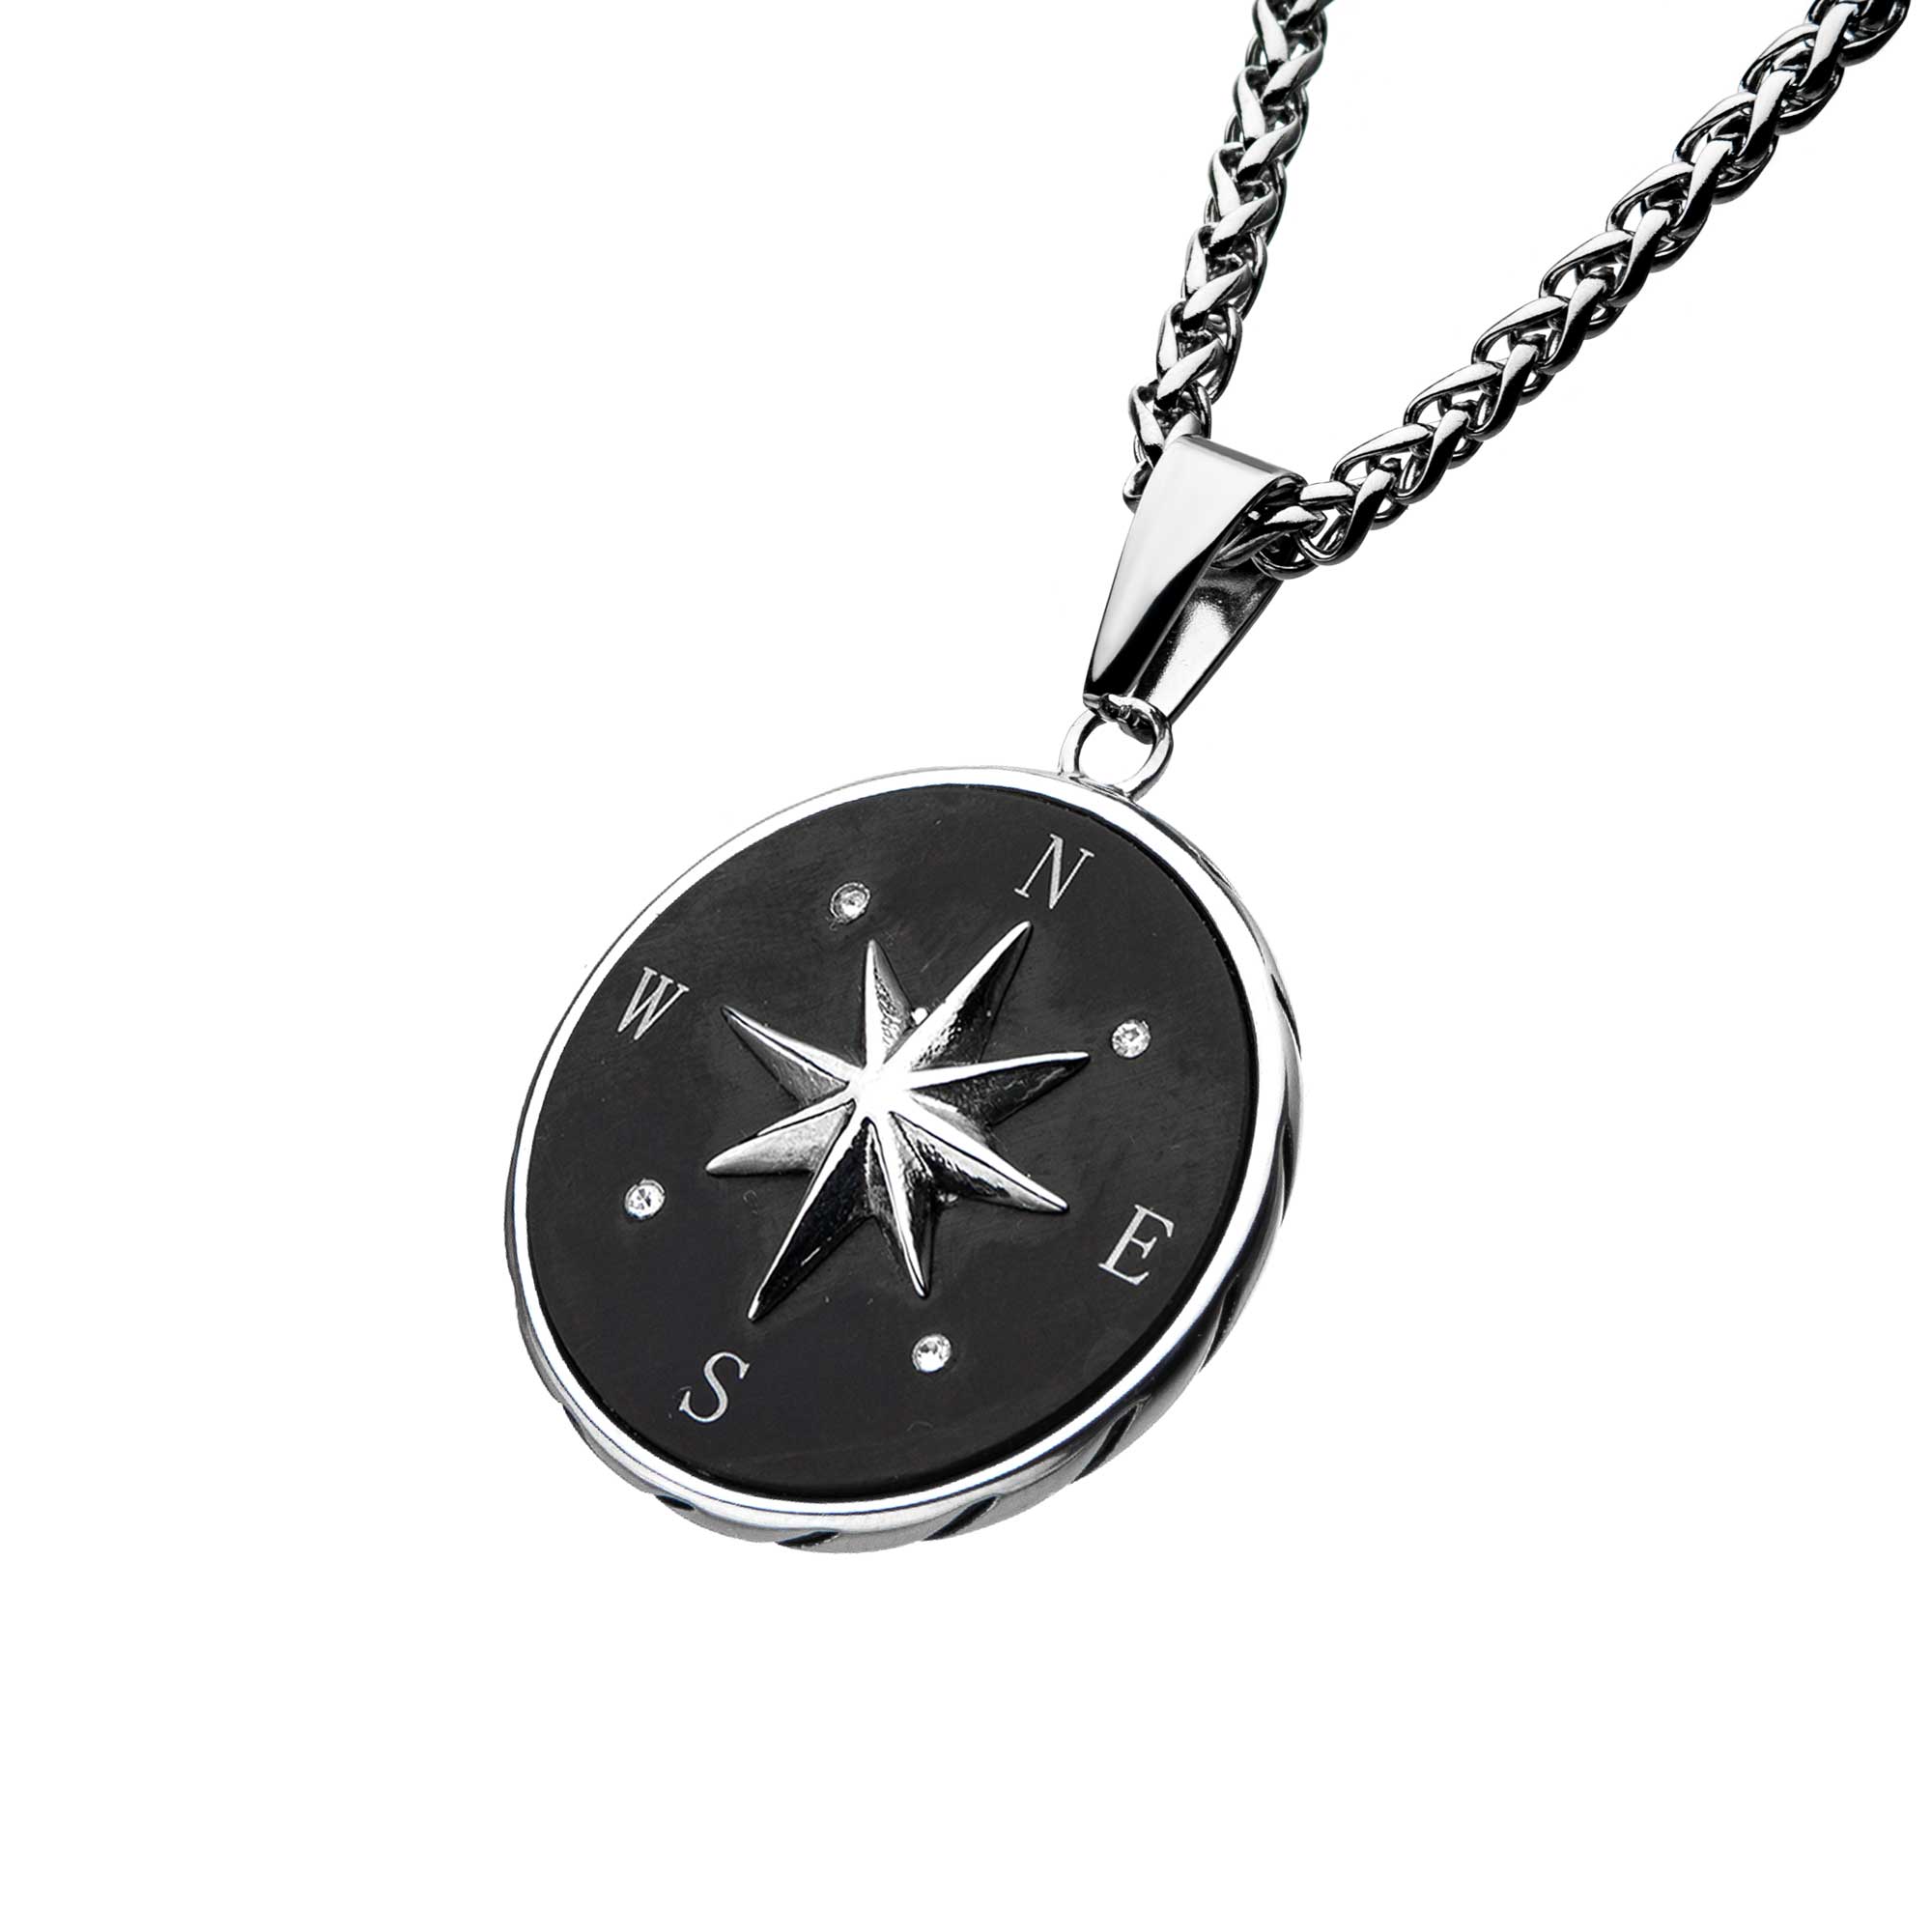 Stainless Steel and Black Plated Compass Pendant with Chain Image 2 P.K. Bennett Jewelers Mundelein, IL